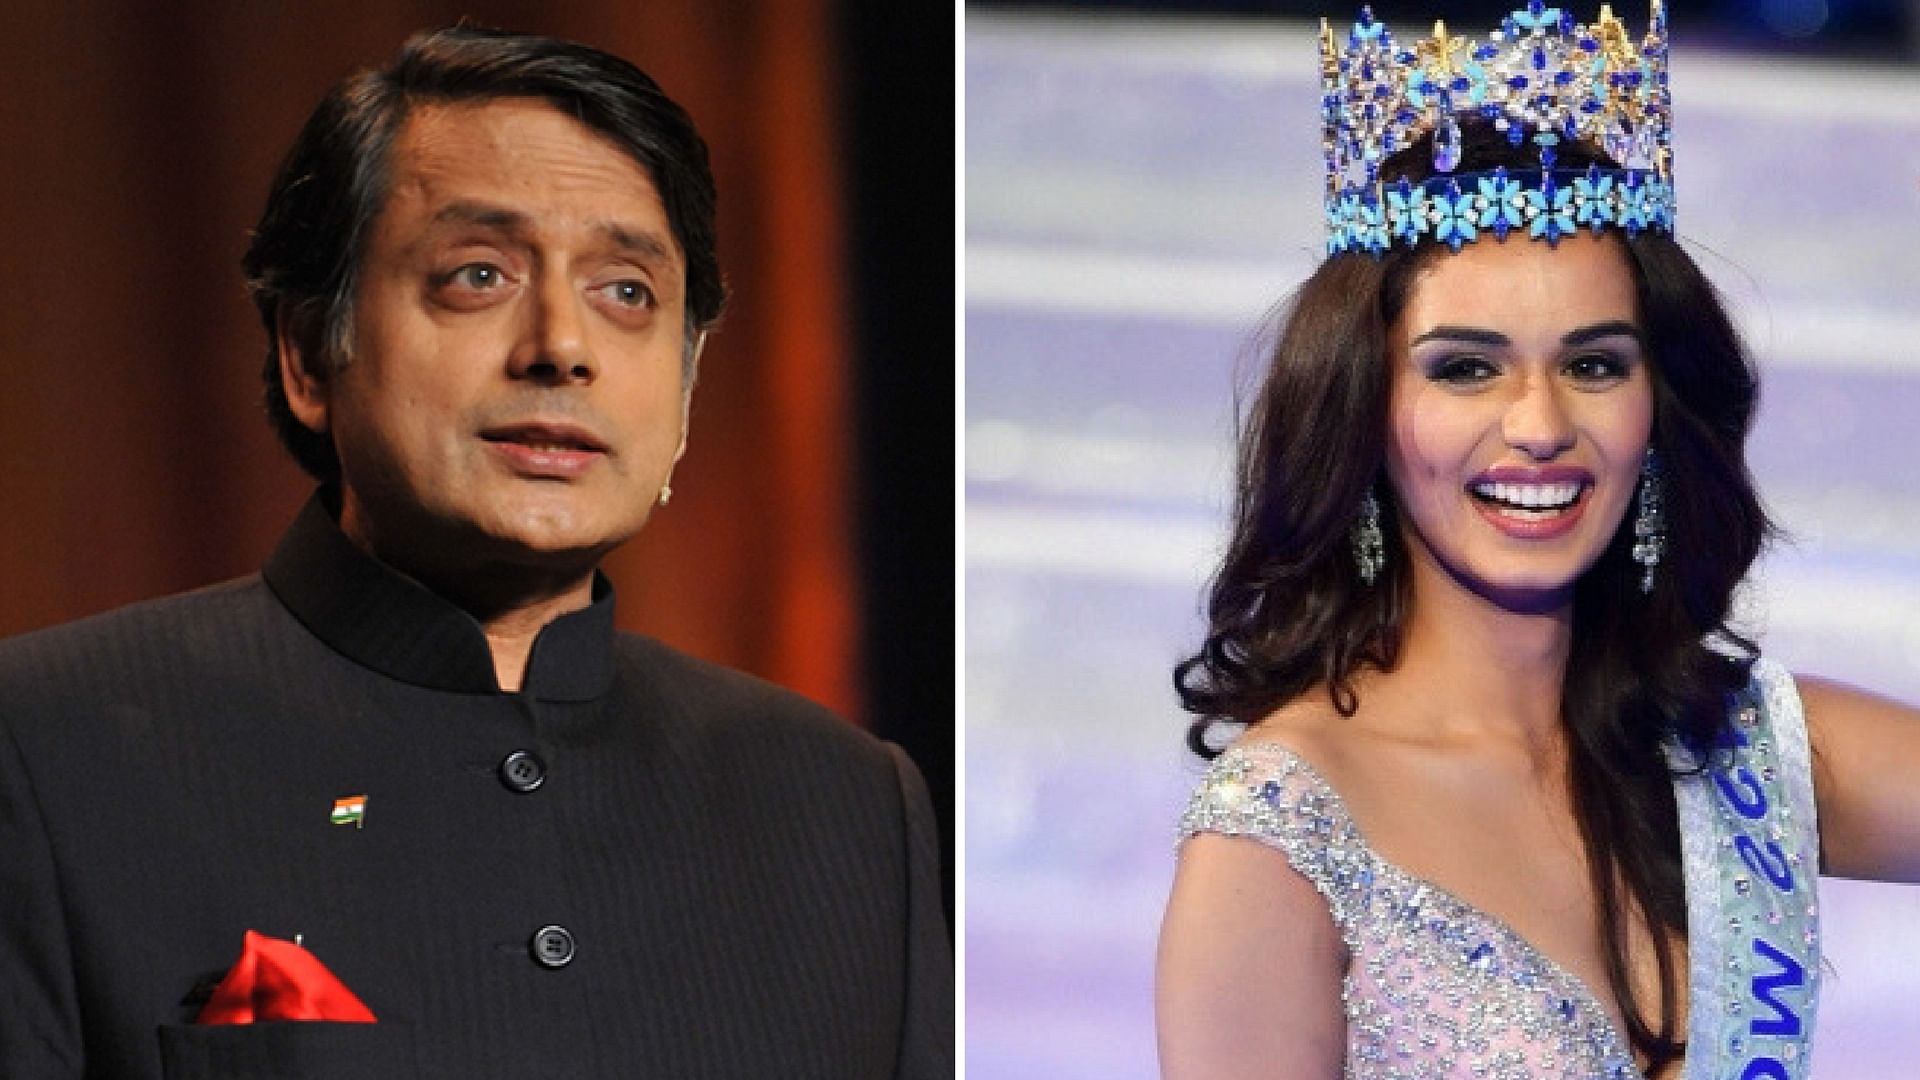 Miss World Manushi Chhillar took to Twitter saying she ‘isn’t going to be upset over a tongue-in-cheek remark’